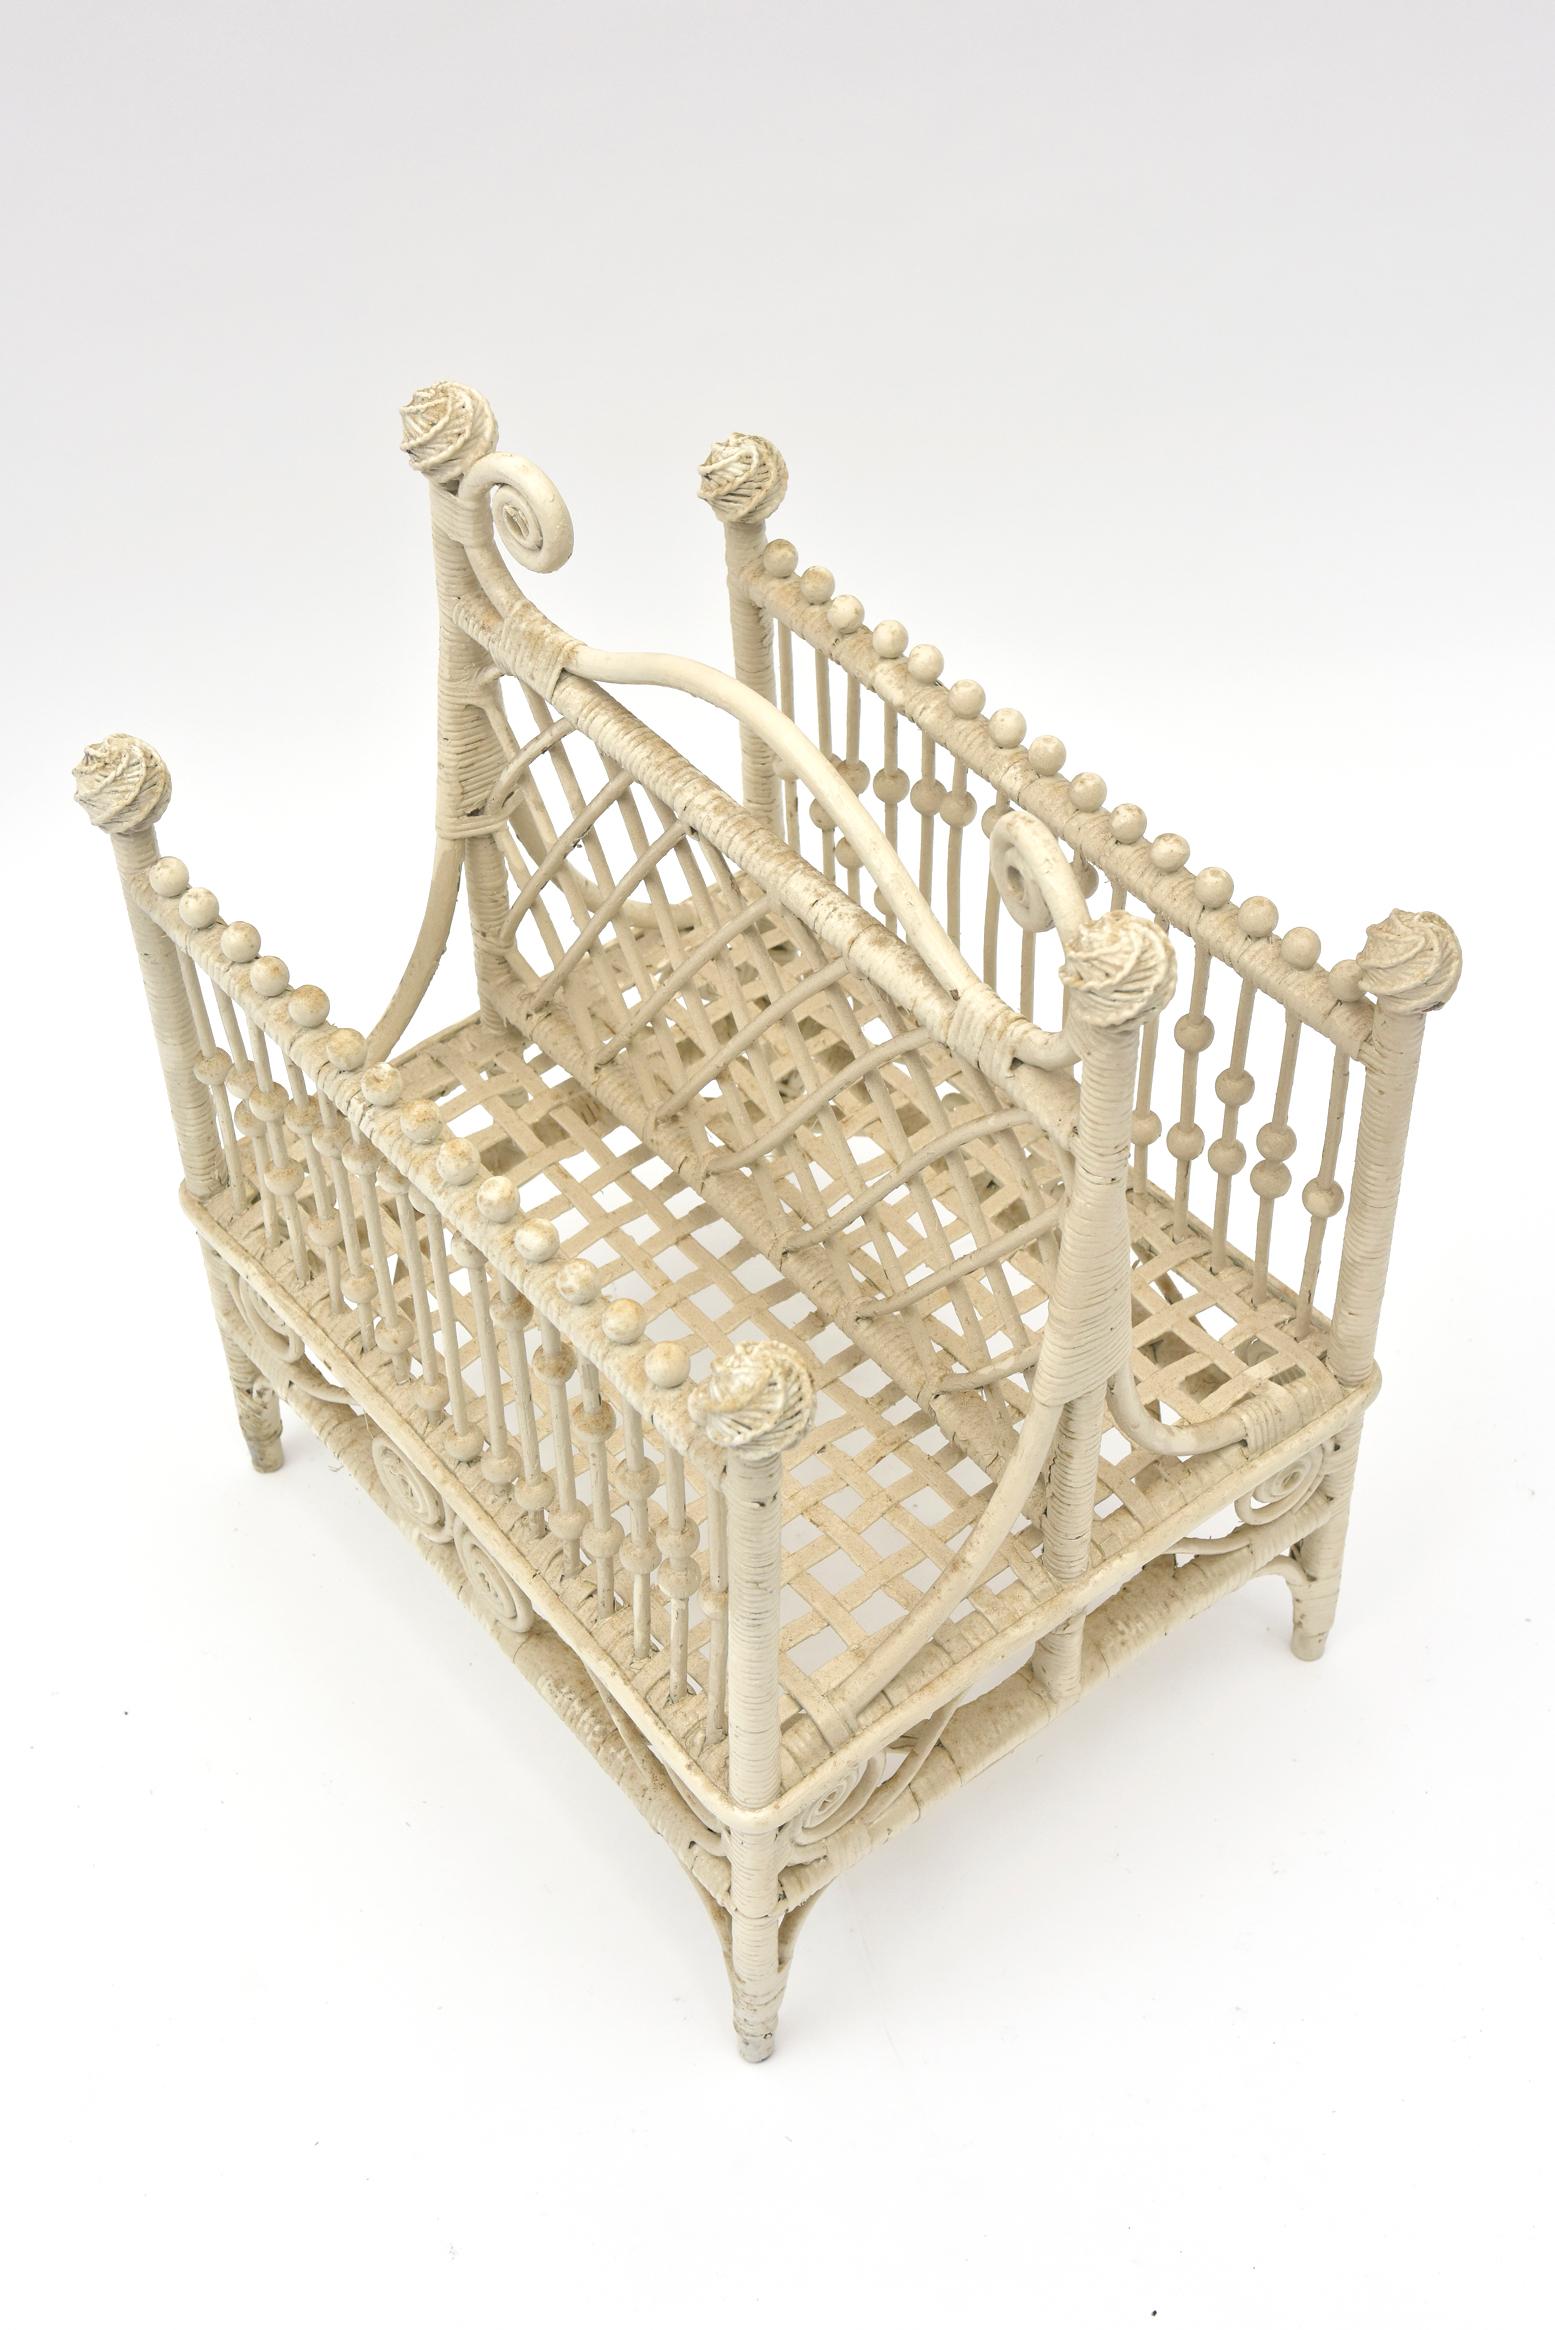 Wicker Ornate Music or Magazine Rack with Beads Curlicues and Woven Ball Finial For Sale 3